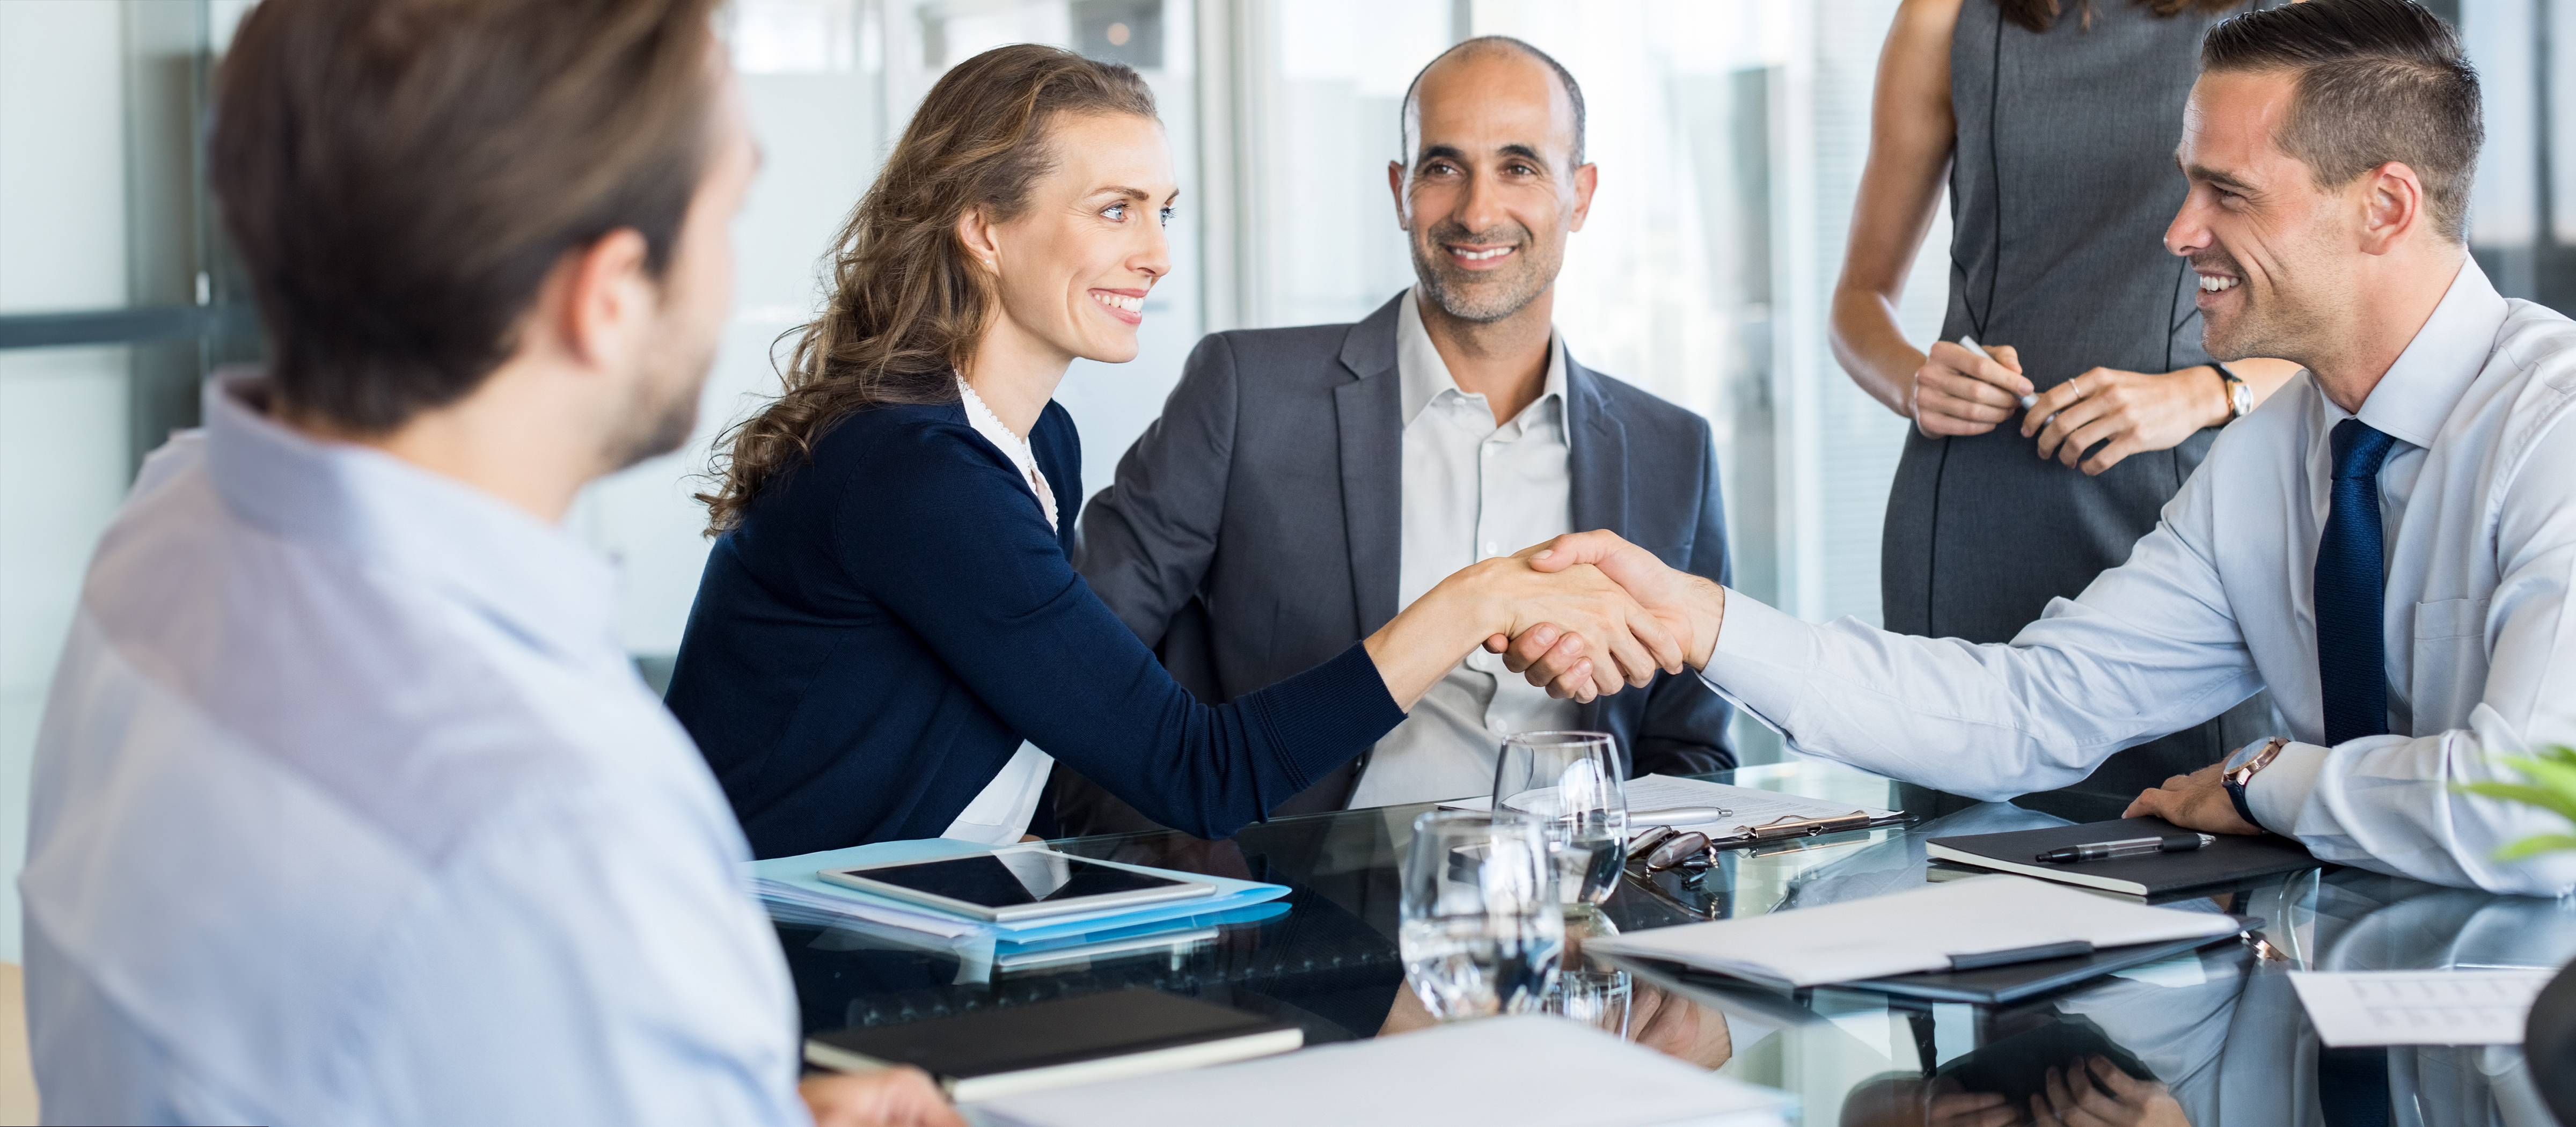 professionals shaking hands over a conference room table